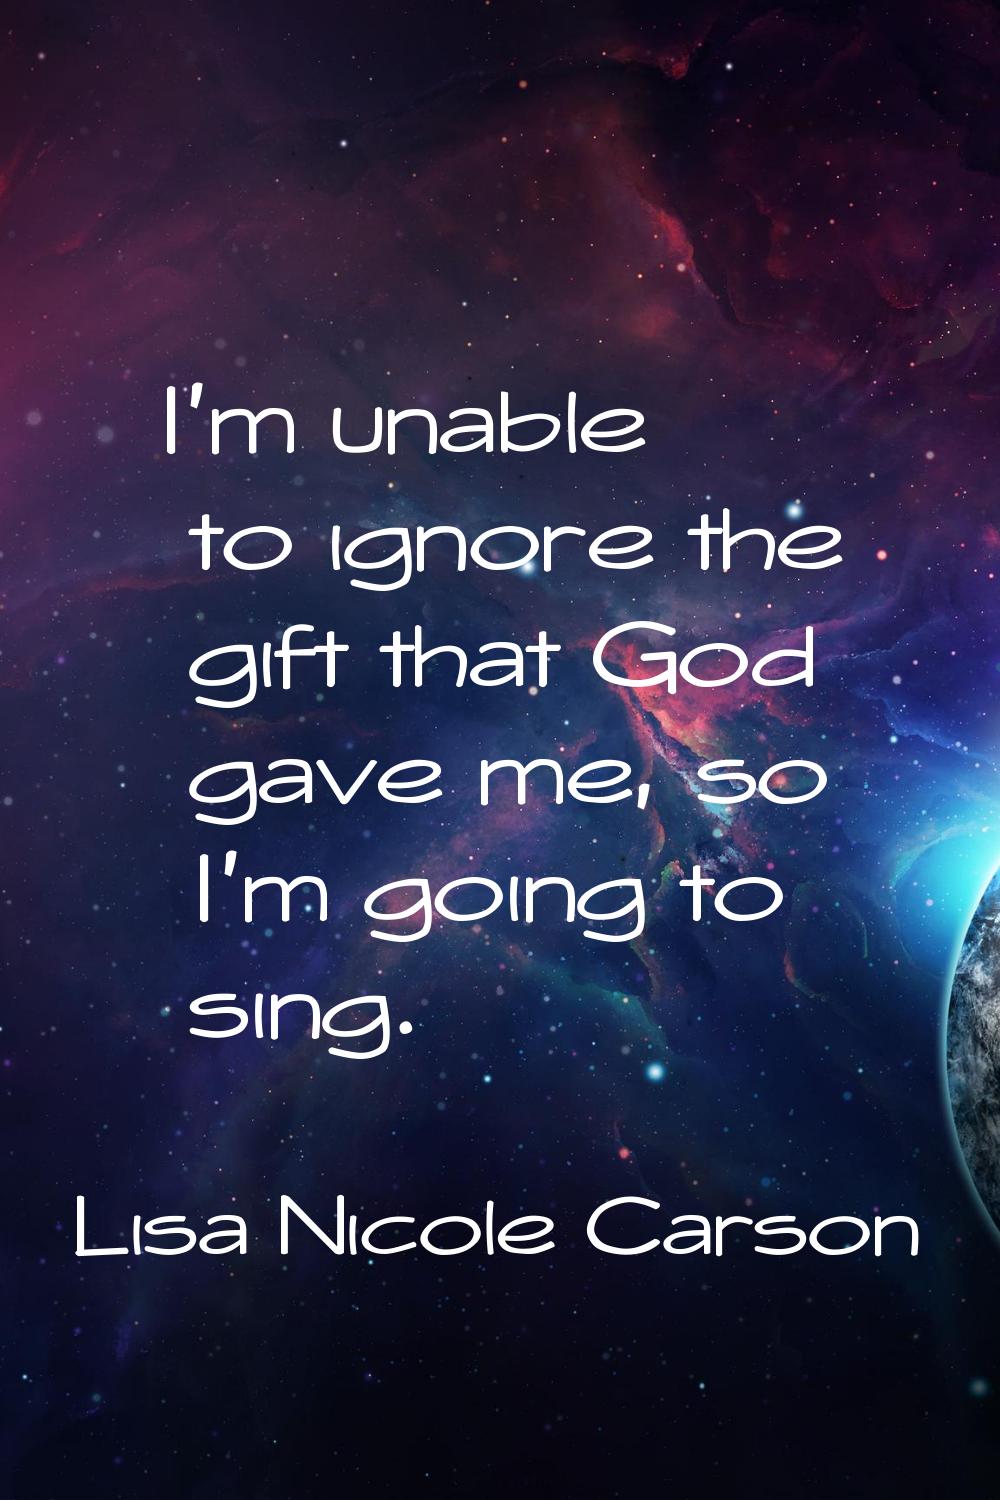 I'm unable to ignore the gift that God gave me, so I'm going to sing.